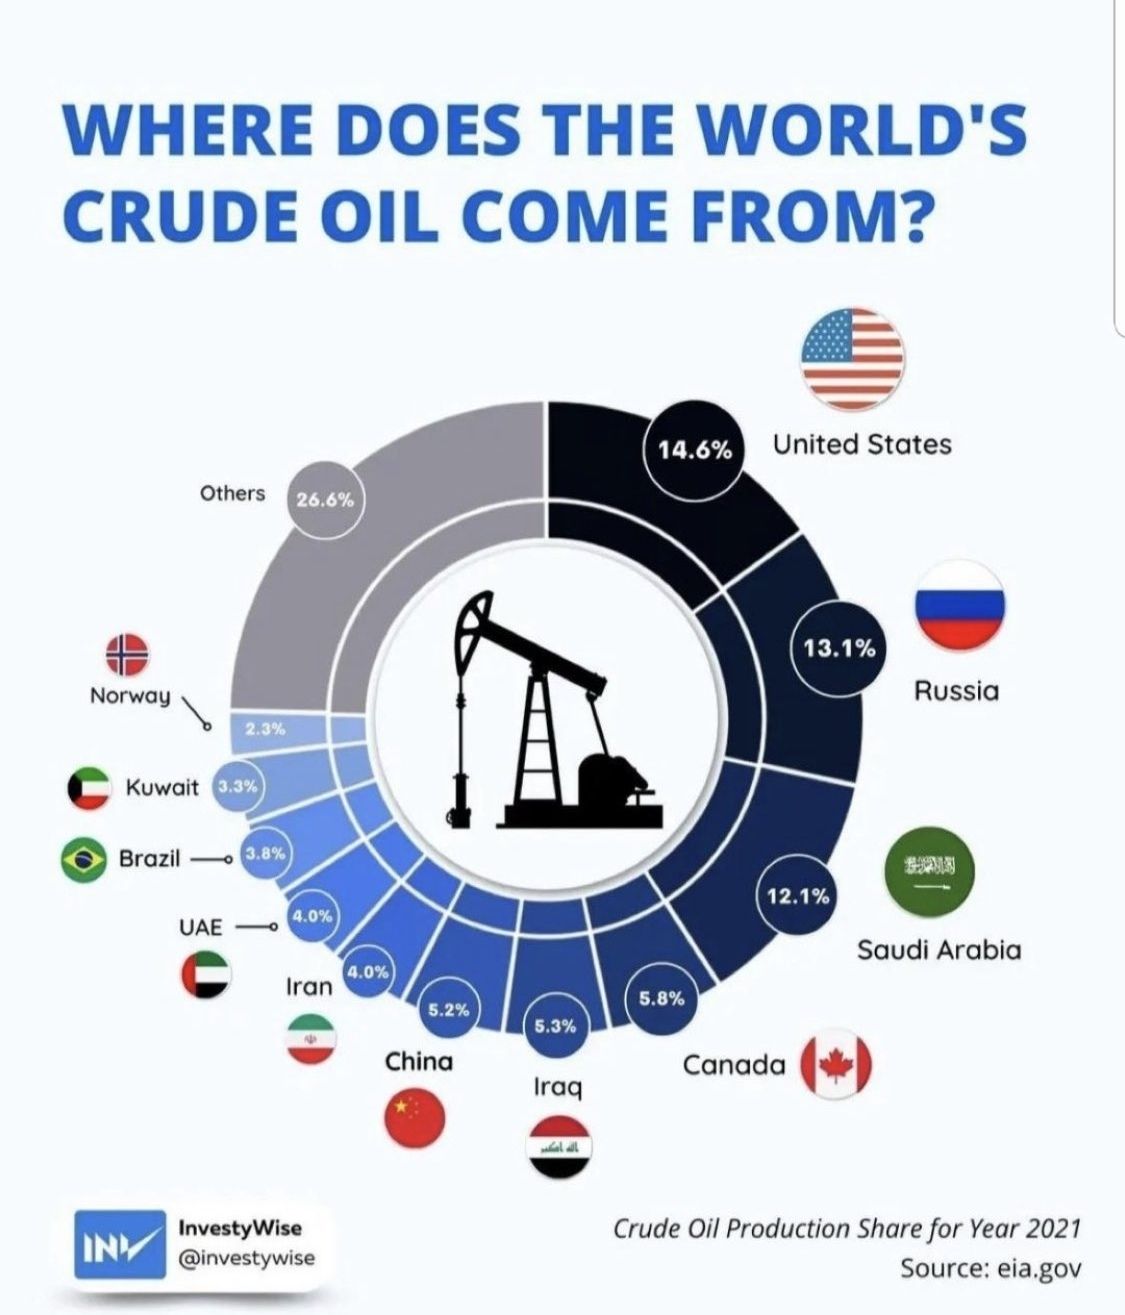 Where does the world's crude oil come from?